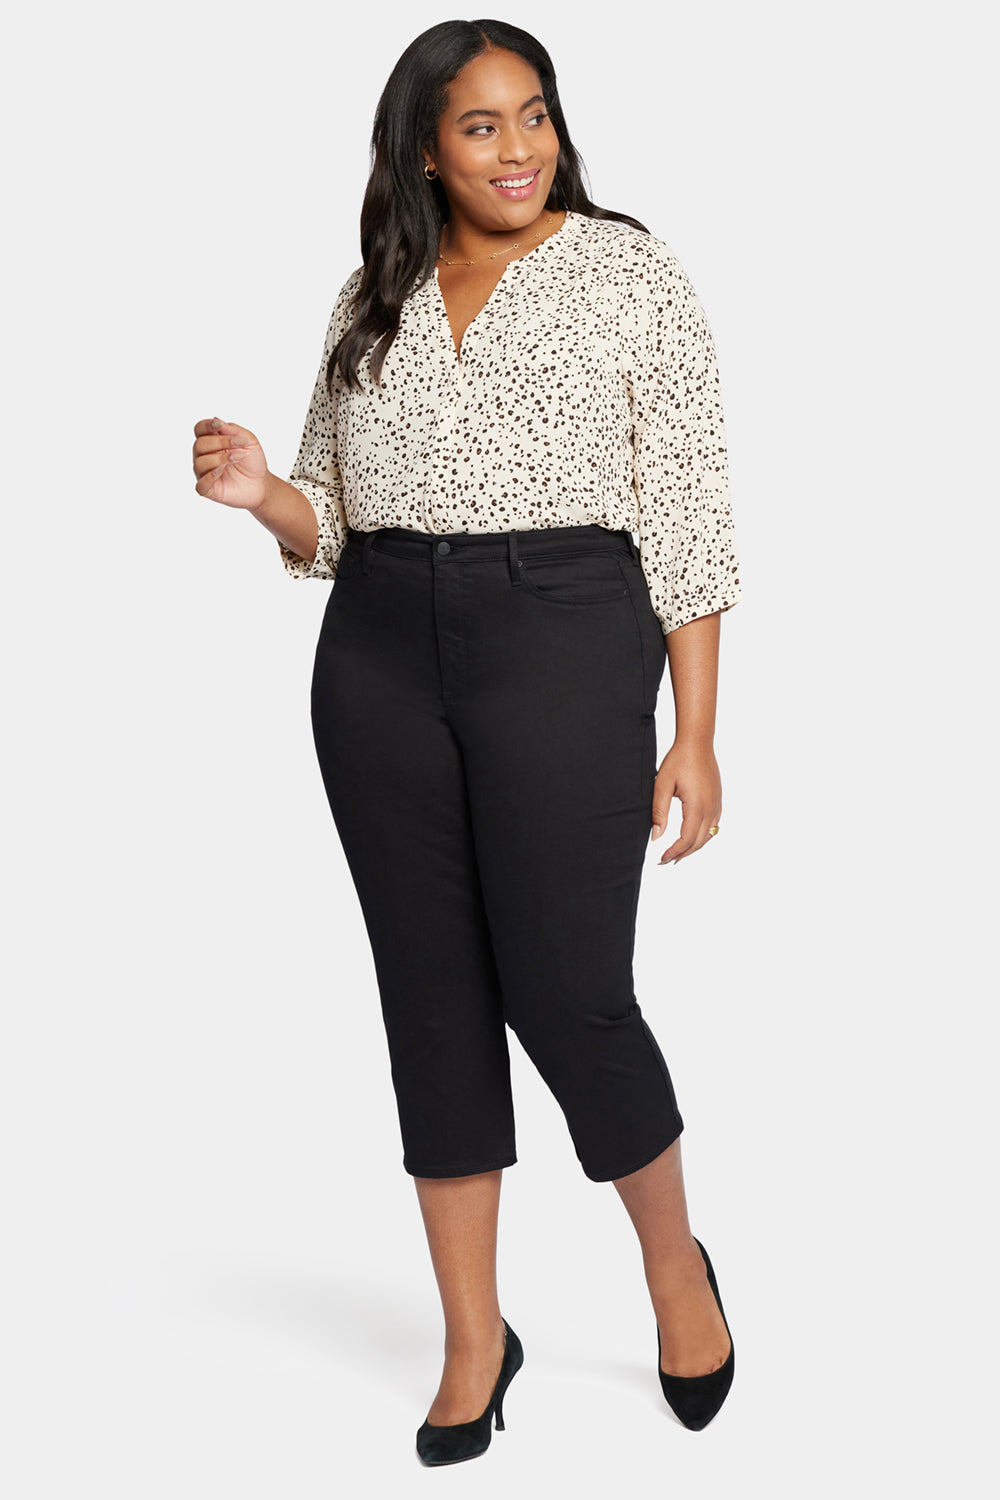 YYDGH Cropped Lightweight Dressy Capris for Women Summer Plus Size